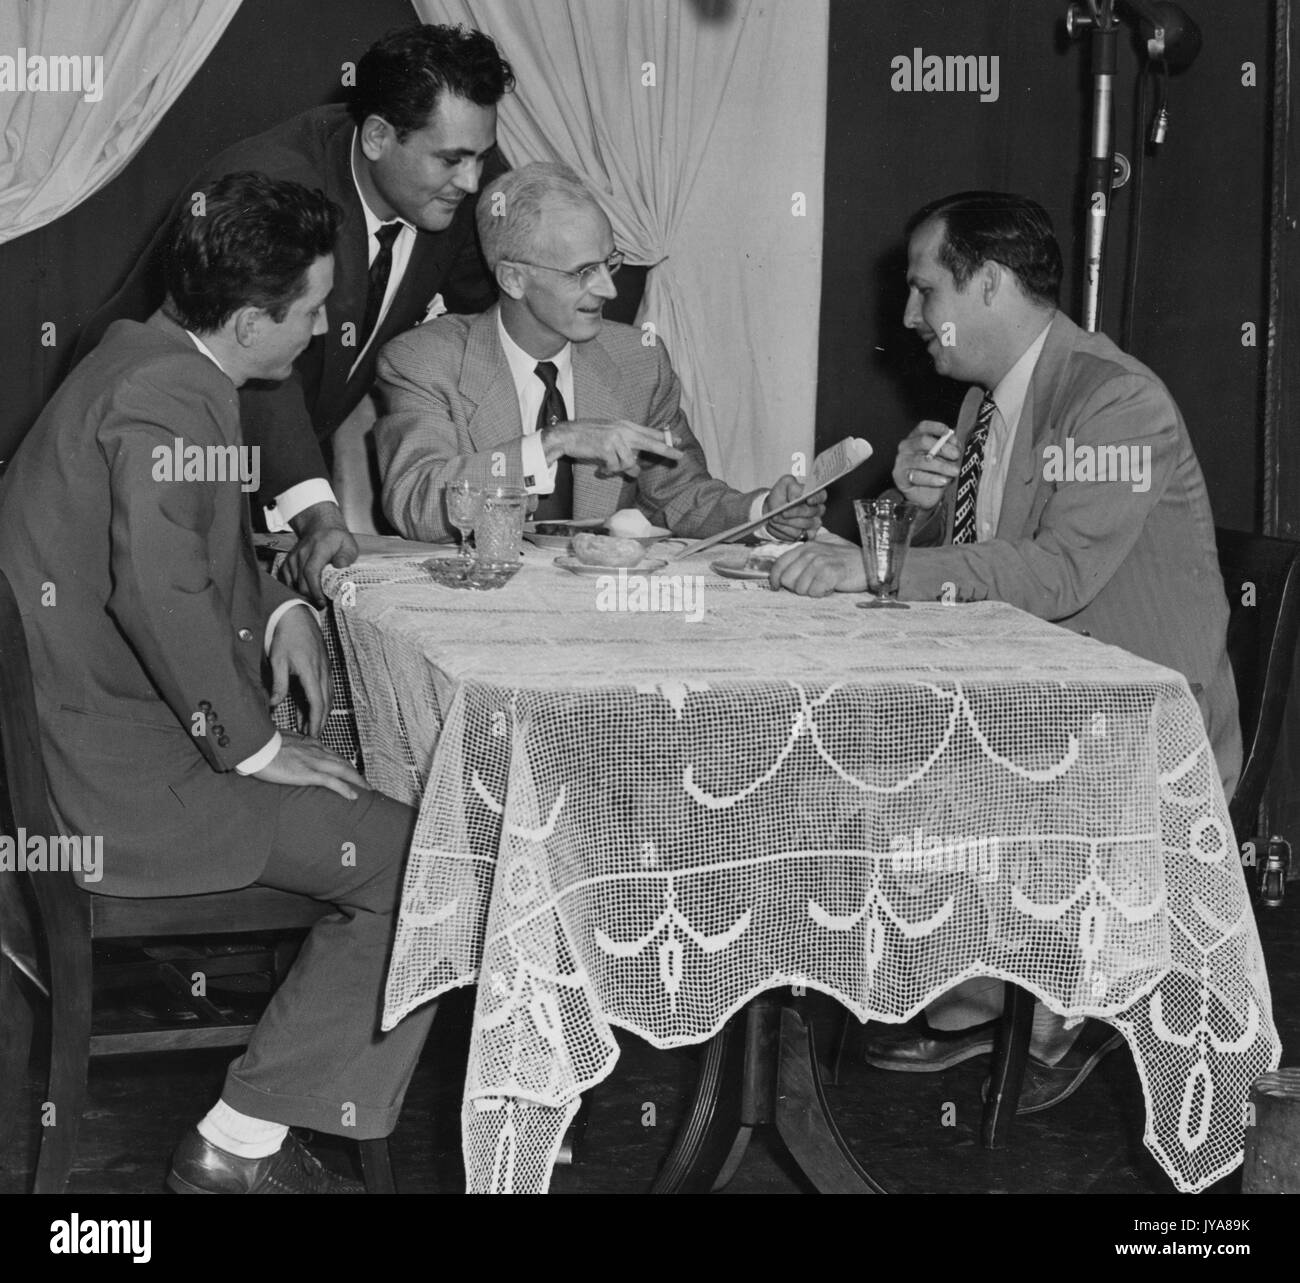 Set of the 'Are You Too Fat?' segment of the Johns Hopkins Science Review, featuring (clockwise from left) Warren Wightman, producer of the Johns Hopkins Science Review; Paul Kane, director of the Johns Hopkins Science Review; American television host Lynn Poole; and Robert Fenwick, associate producer for WAAM Baltimore, September 29, 1952. Stock Photo